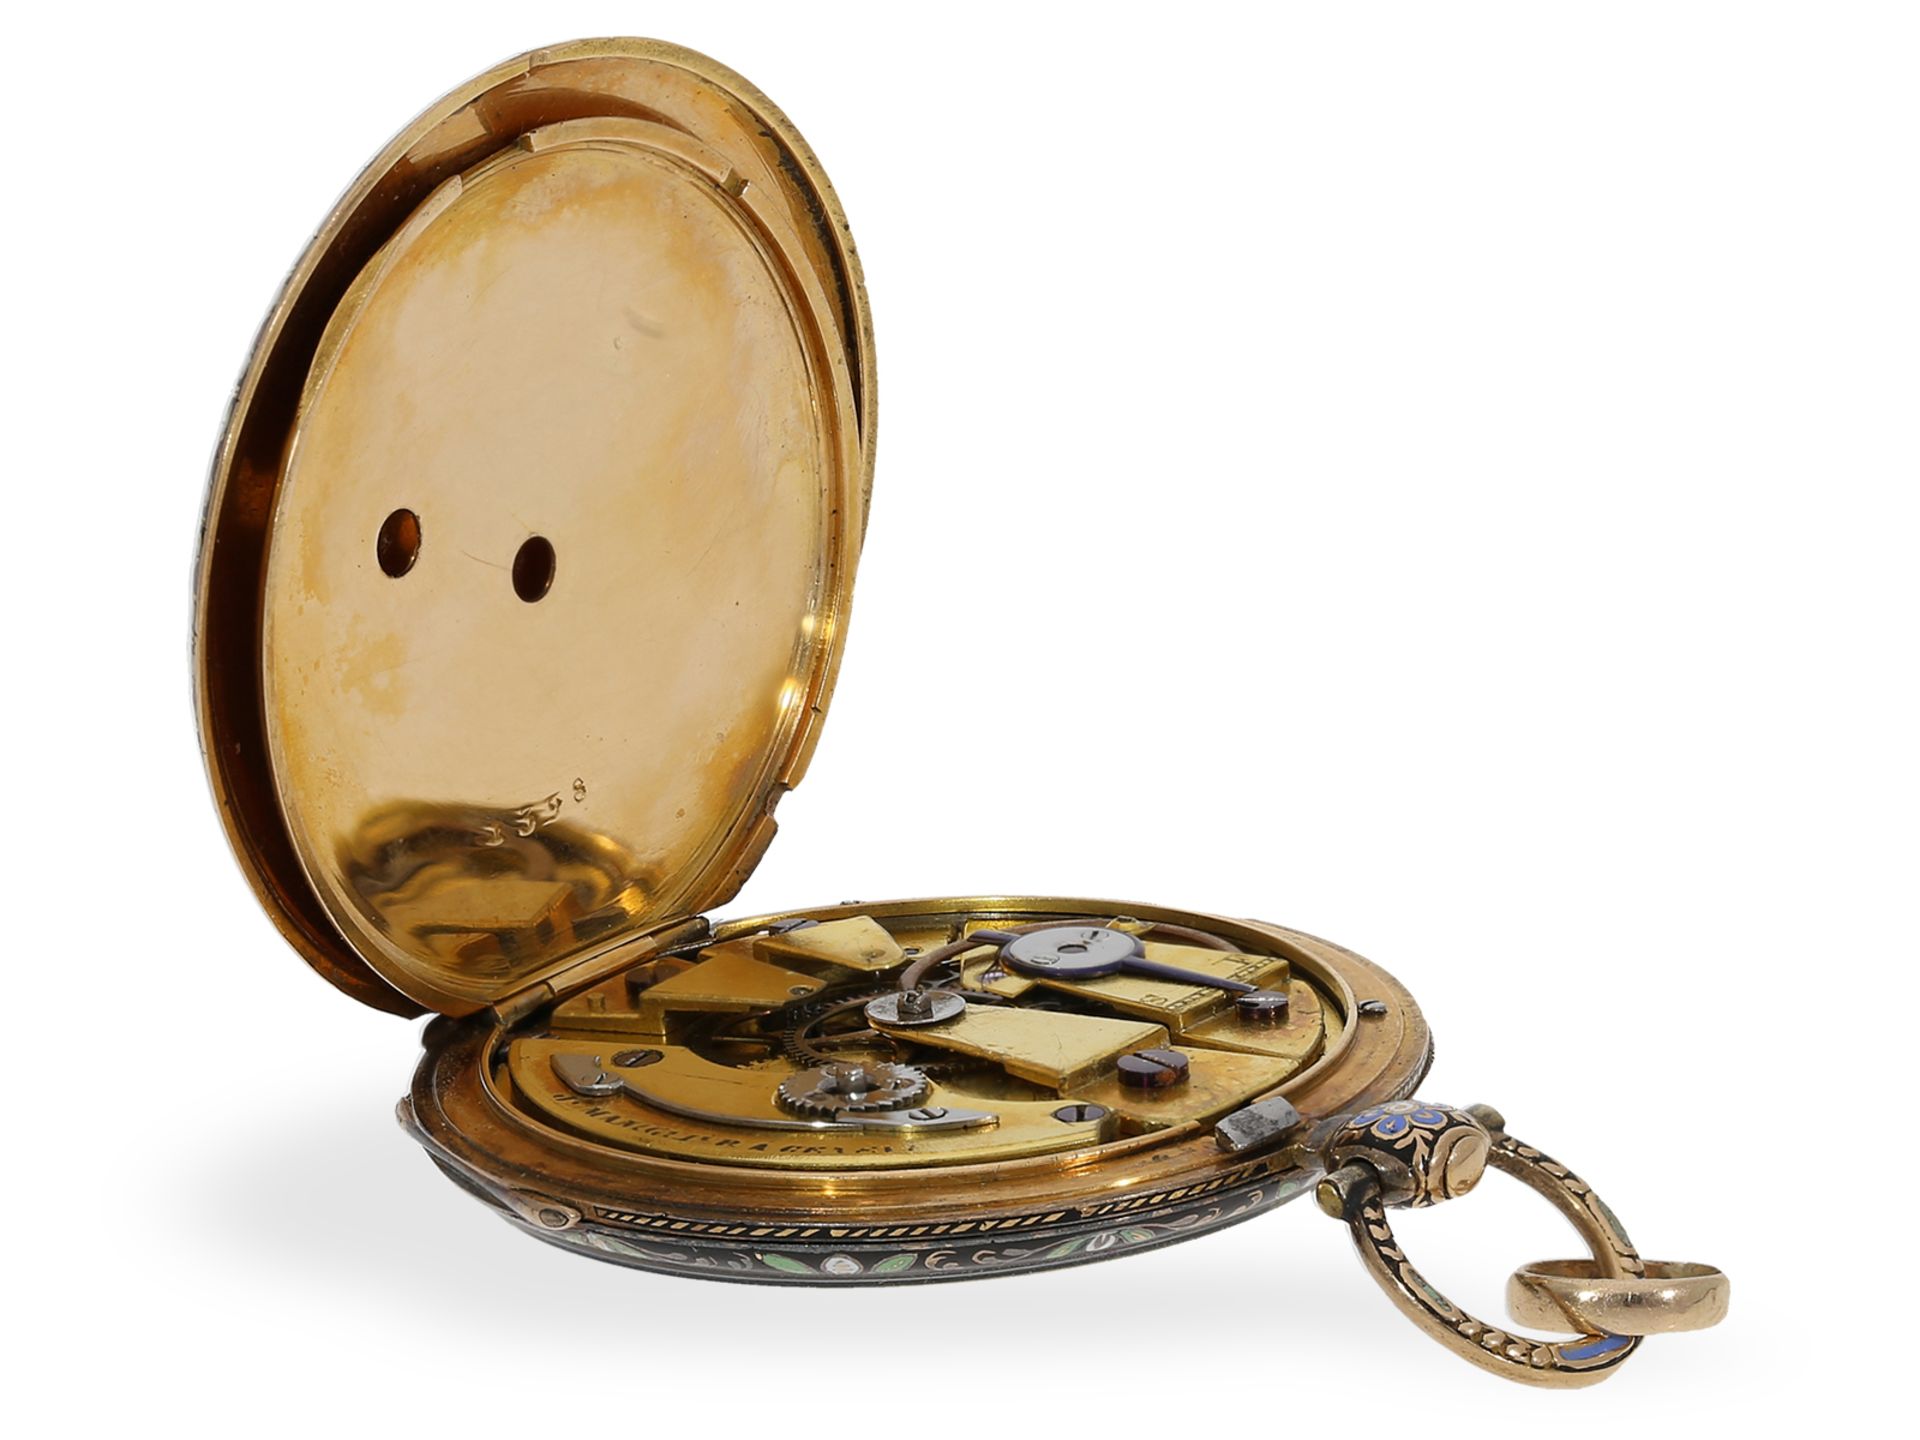 Pocket watch: magnificent gold/enamel lepine with original box and gold key, ca. 1820 - Image 5 of 9